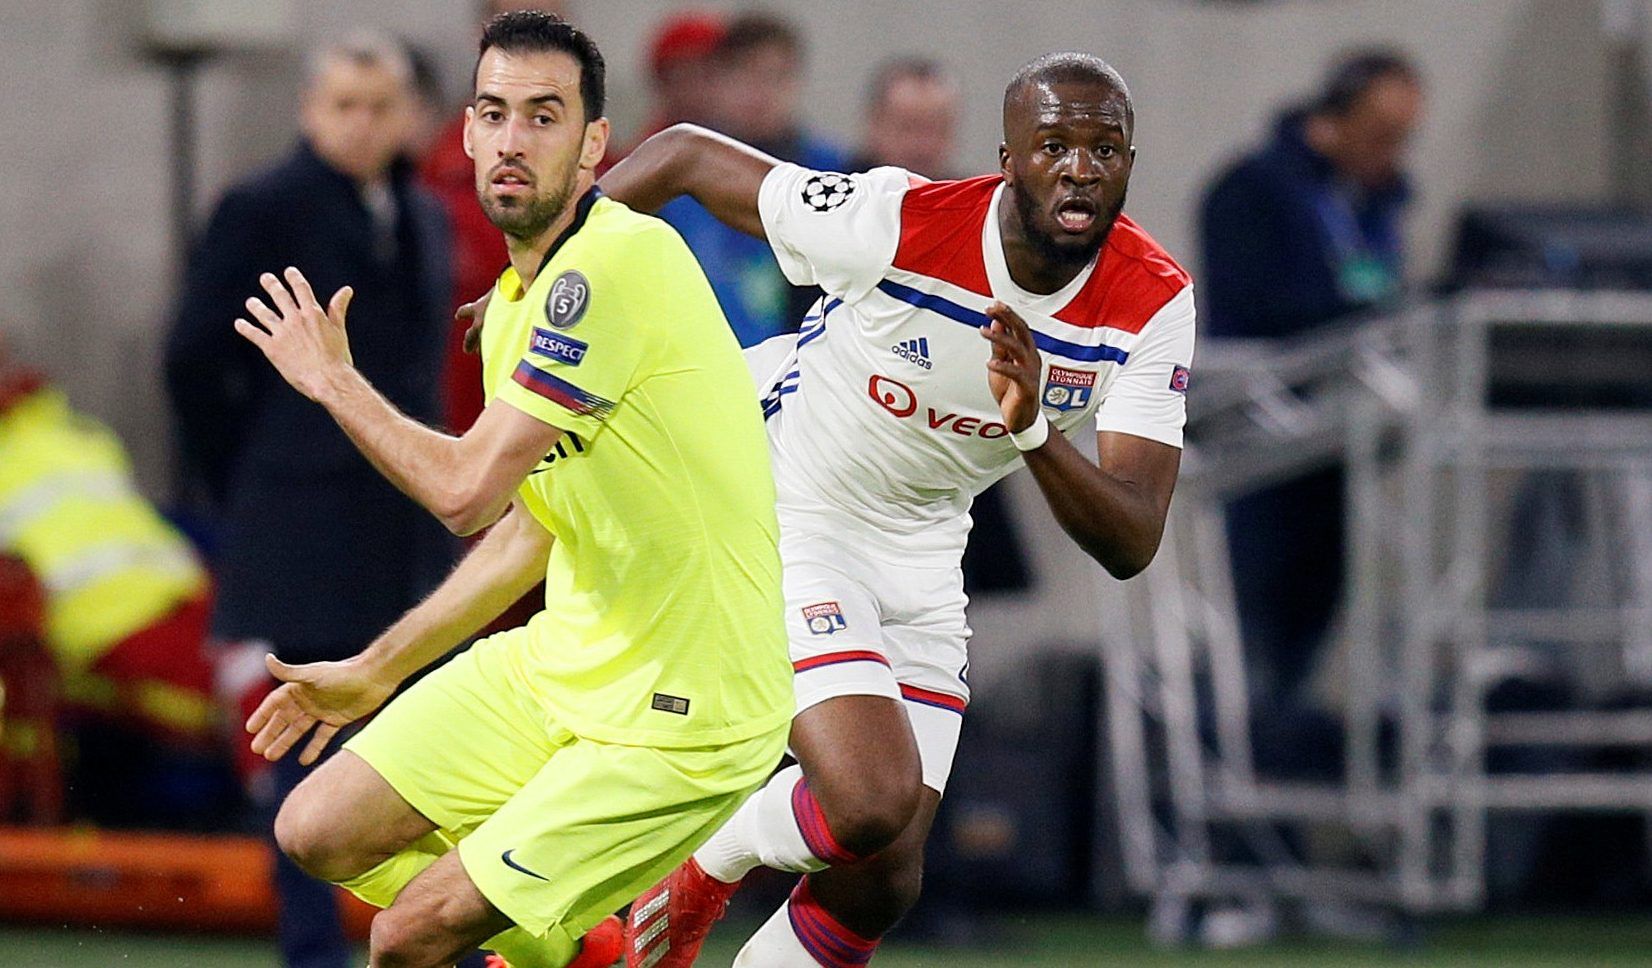 Soccer Football - Champions League - Round of 16 First Leg - Olympique Lyonnais v FC Barcelona - Groupama Stadium, Lyon, France - February 19, 2019  Barcelona's Sergio Busquets in action with Lyon's Tanguy Ndombele   REUTERS/Emmanuel Foudrot